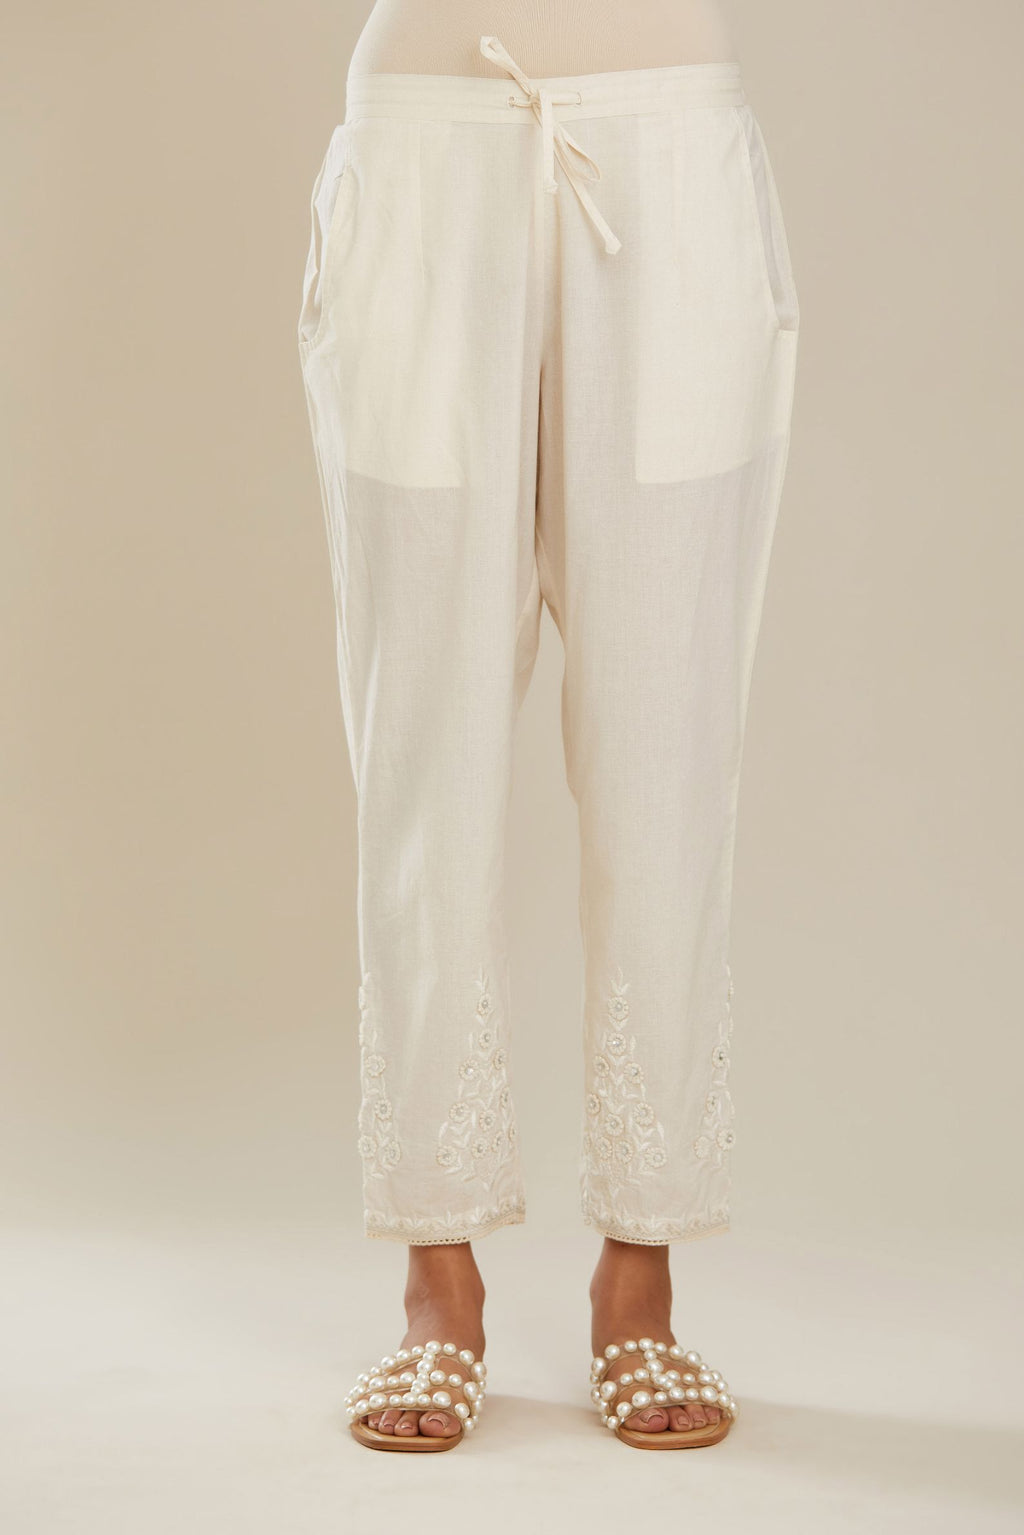 Off white cotton narrow pants with 3d embroidered flower boota at hem, highlighted with hand attached sequin and beads. Bottom hem edged with  lace. (Pants)